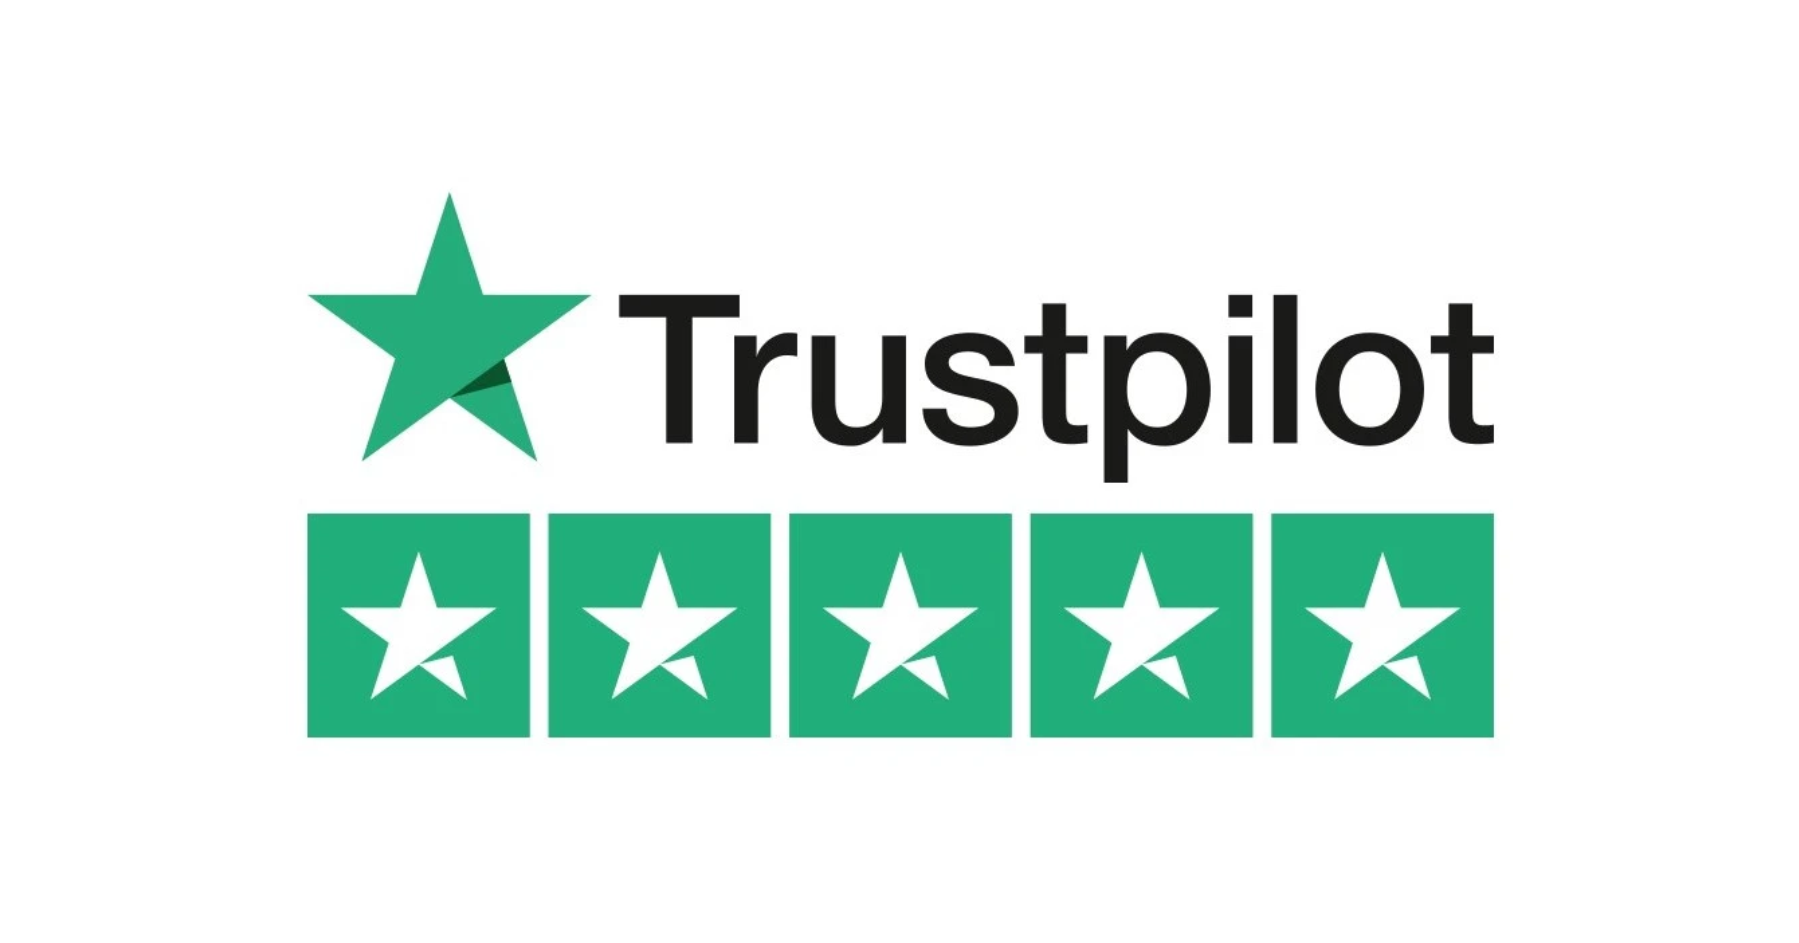 The Vapeist receives 5 star reviews on Trustpilot for friendly staff